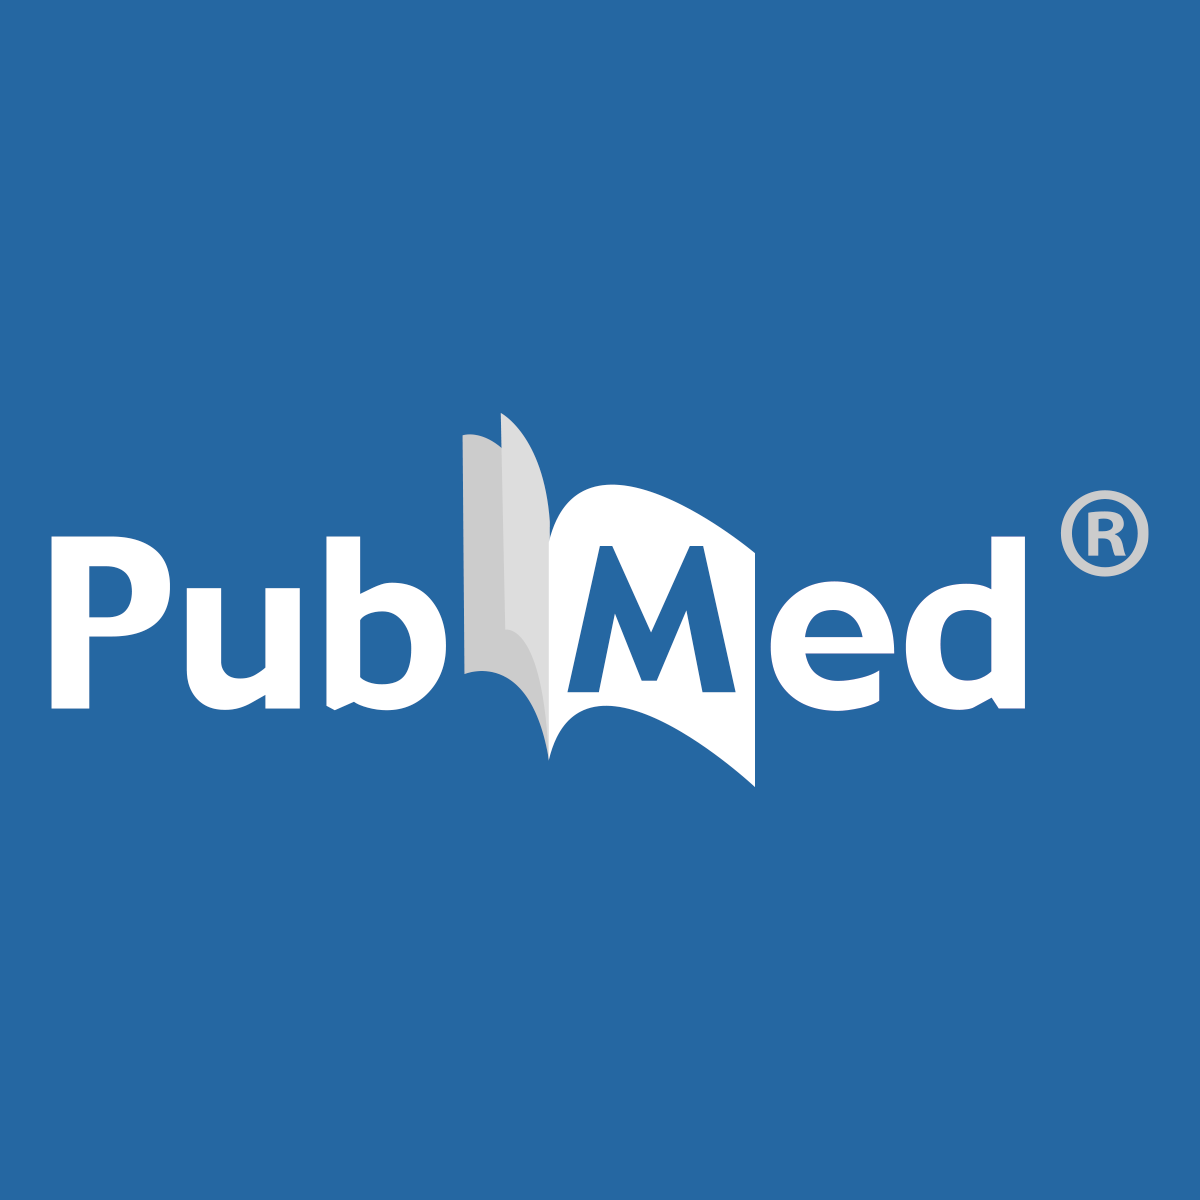 Survival Outcomes in Patients With Hormone Receptor-Positive Metastatic Breast Cancer With Low or No ERBB2 Expression Treated With Targeted Therapies Plus Endocrine Therapy - PubMed